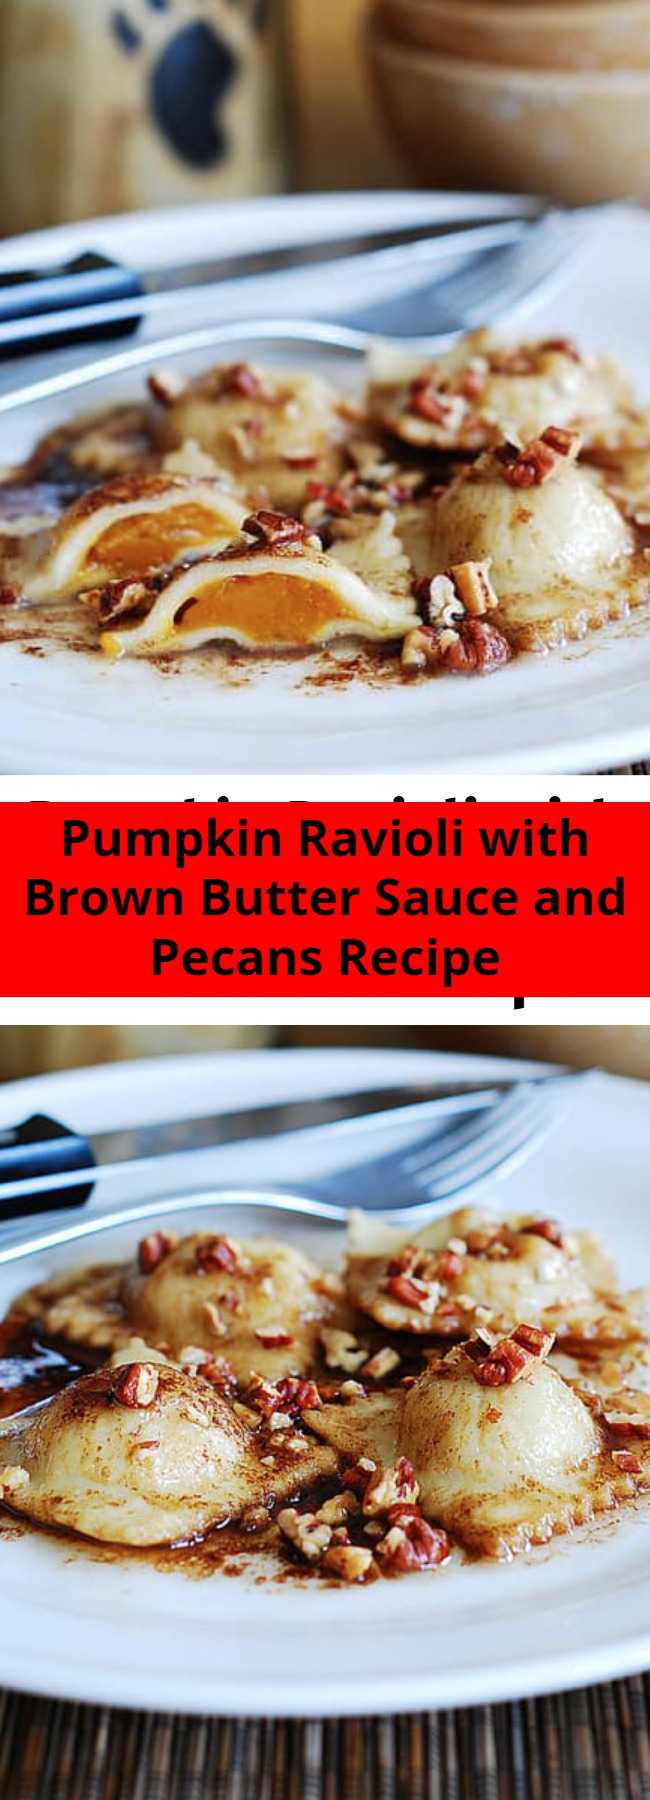 Pumpkin Ravioli with Brown Butter Sauce and Pecans Recipe - everything is made from scratch! Great recipe during the holiday season (Thanksgiving and Christmas) with lots of seasonal ingredients: pumpkin, pecans, nutmeg.